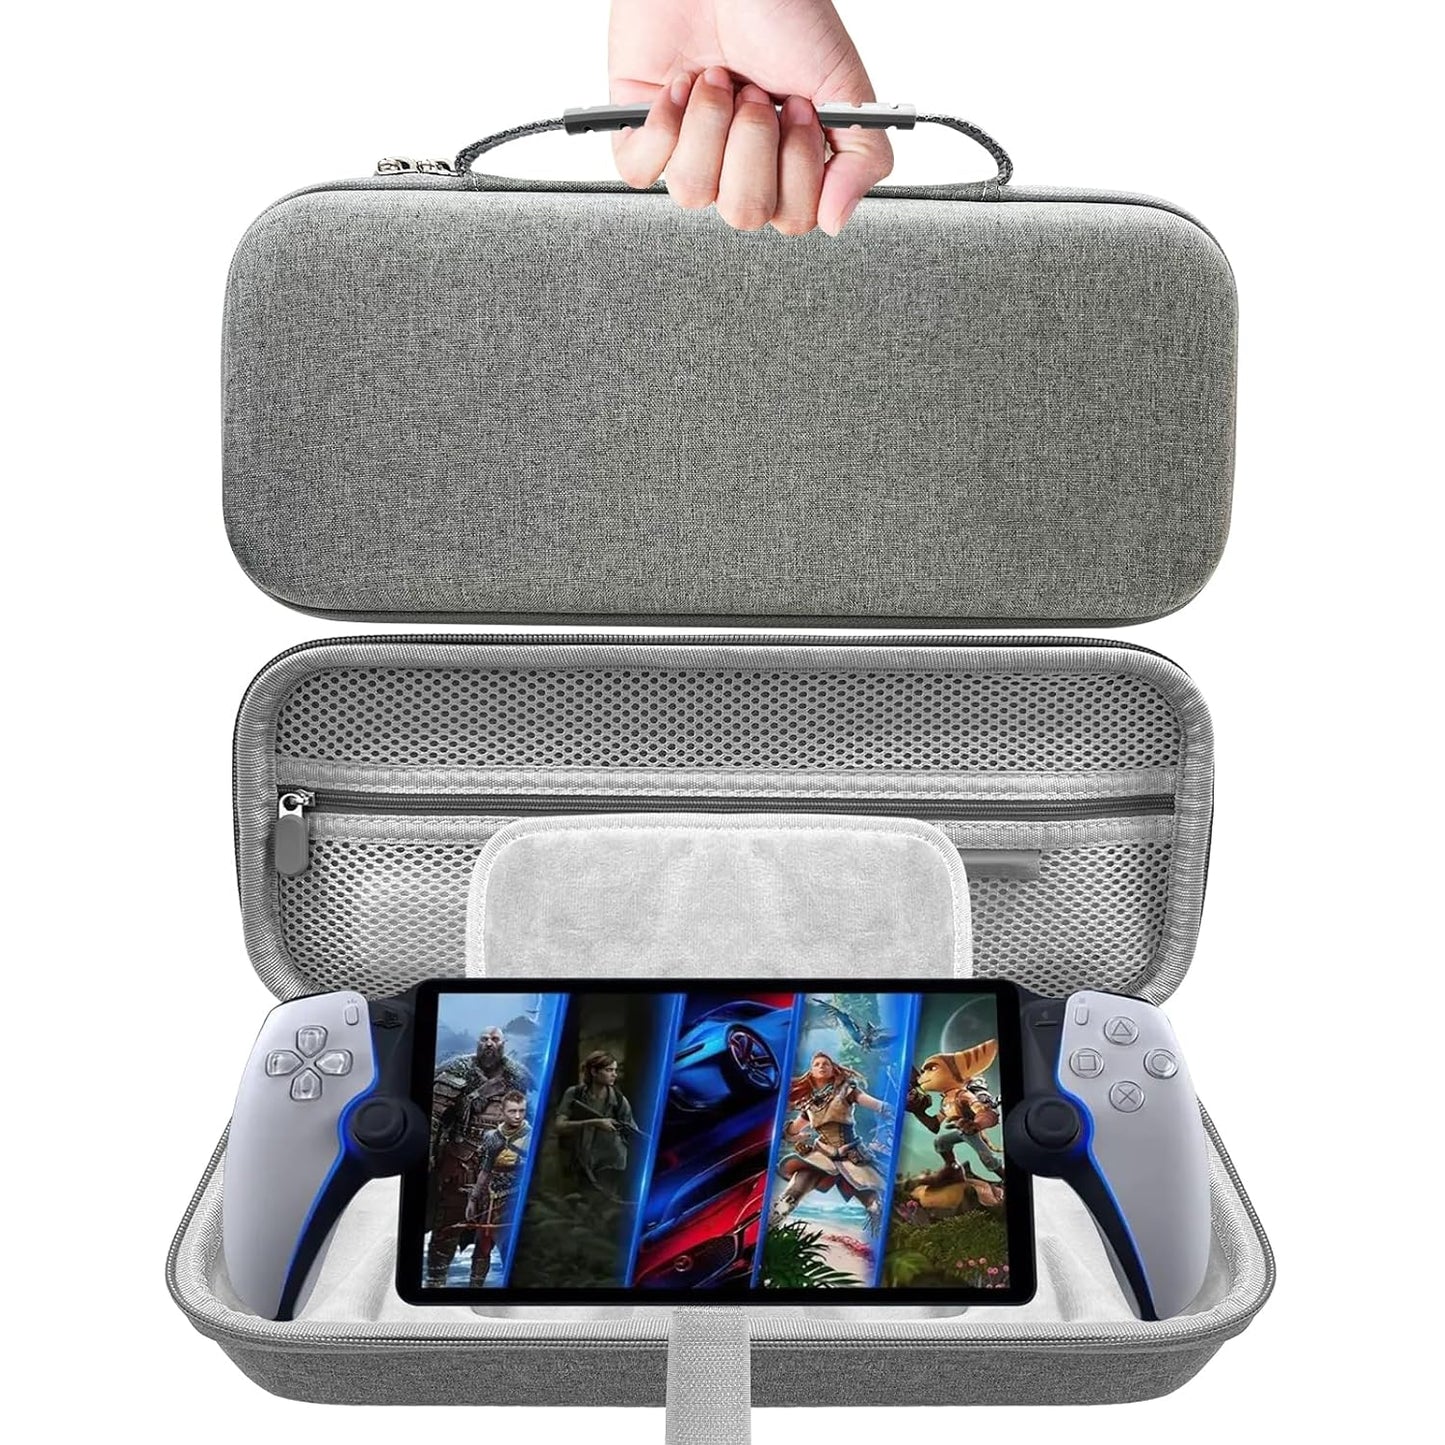 PlayStation Portal Carrying Protective Case - For Storage and Travel